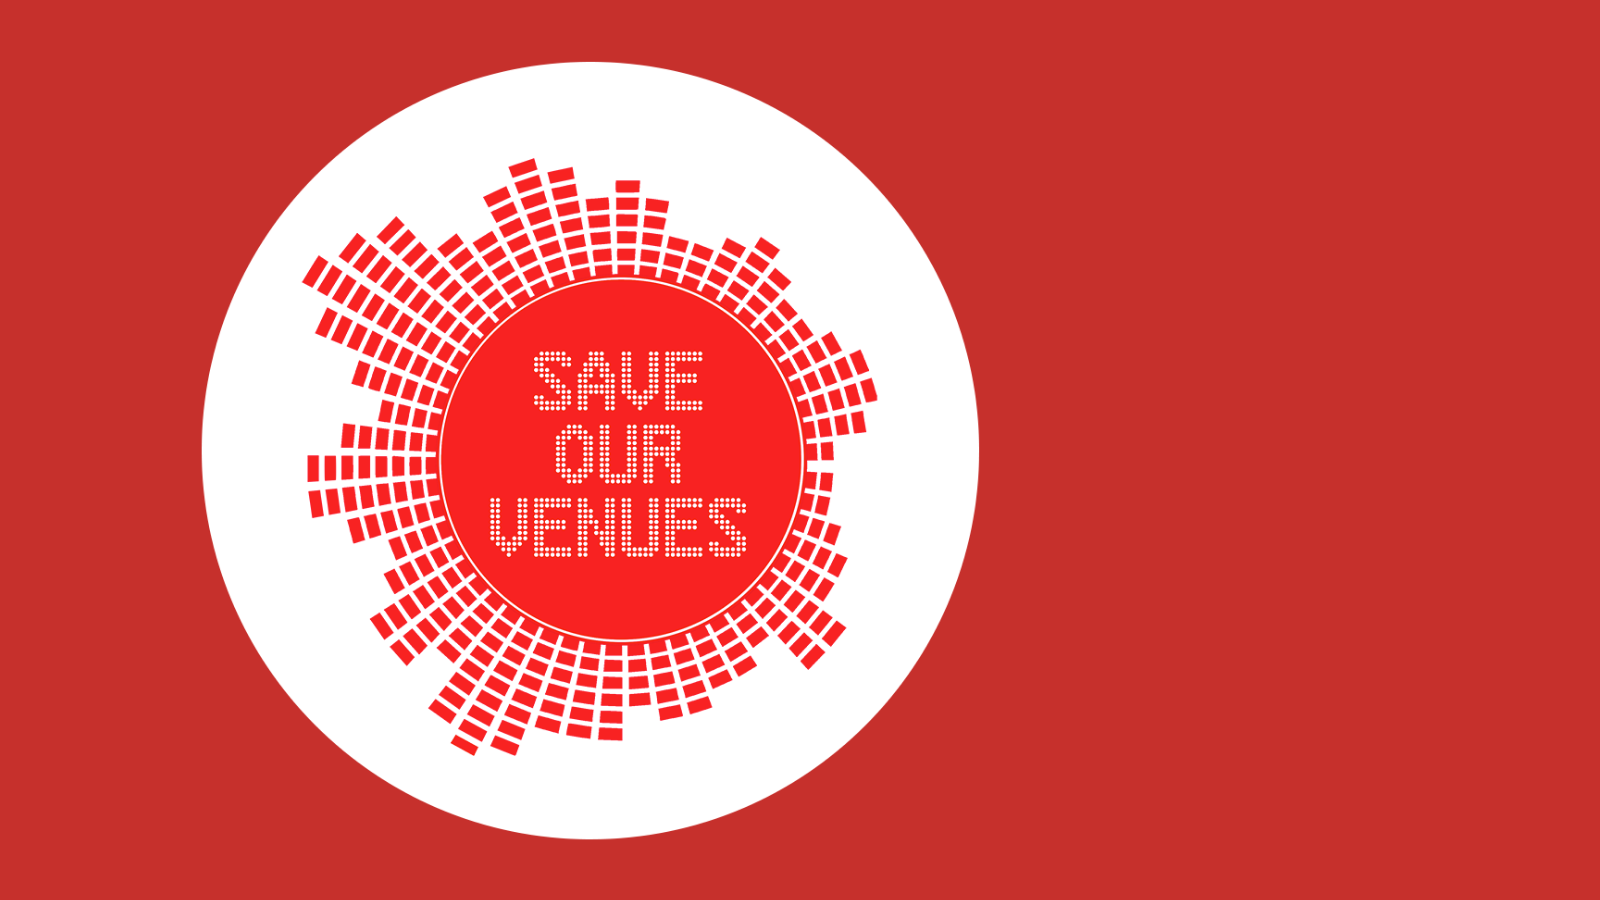 At least four independent Scottish venues still face threat of closure